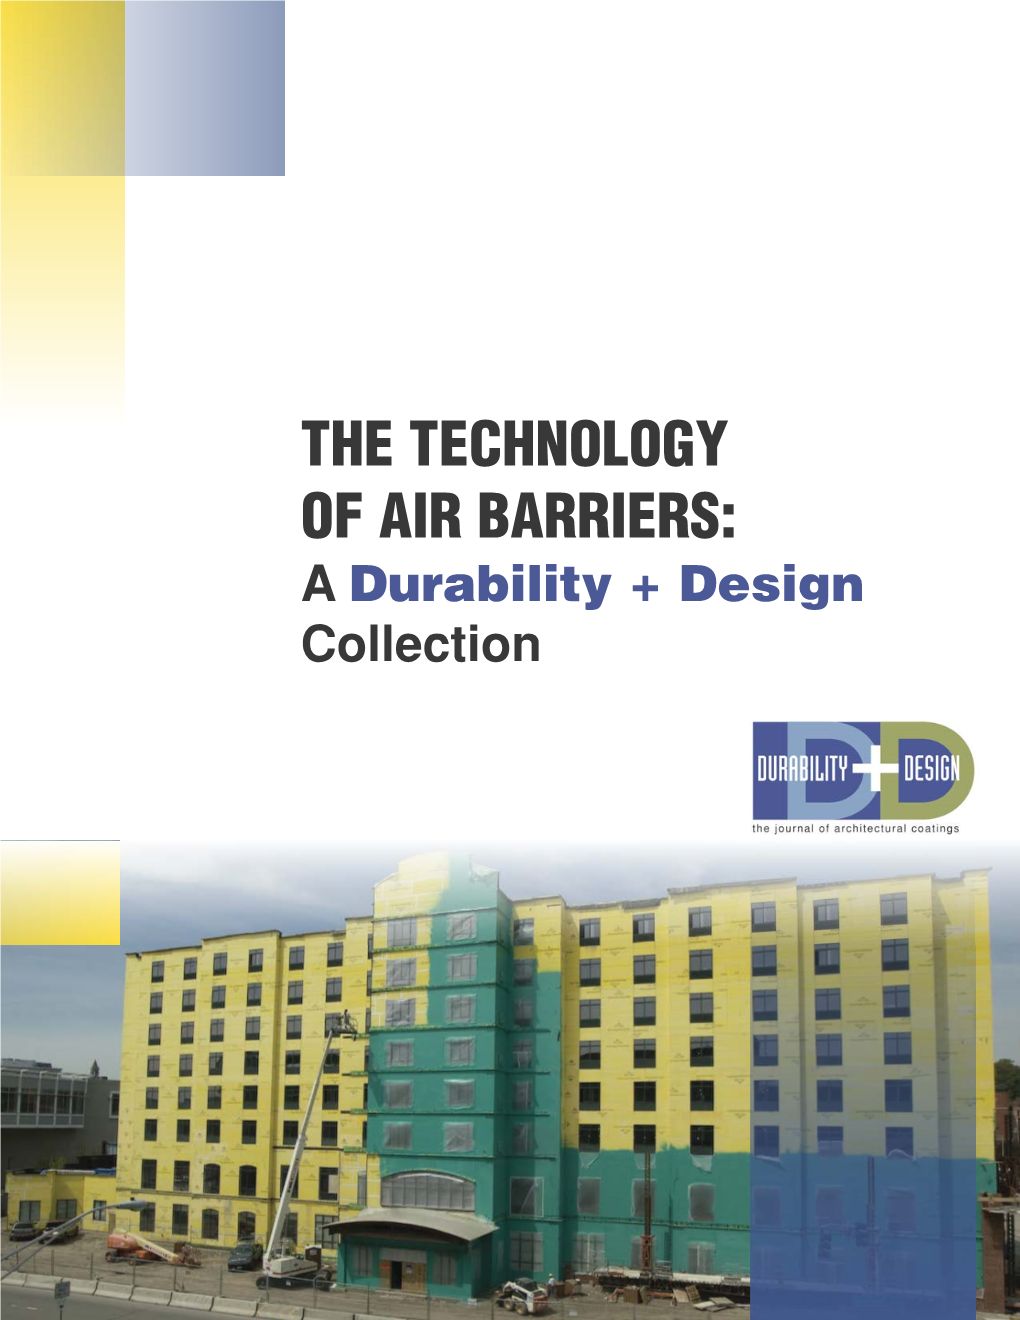 THE TECHNOLOGY of AIR BARRIERS: a Durability + Design Collection the Technology of Air Barriers